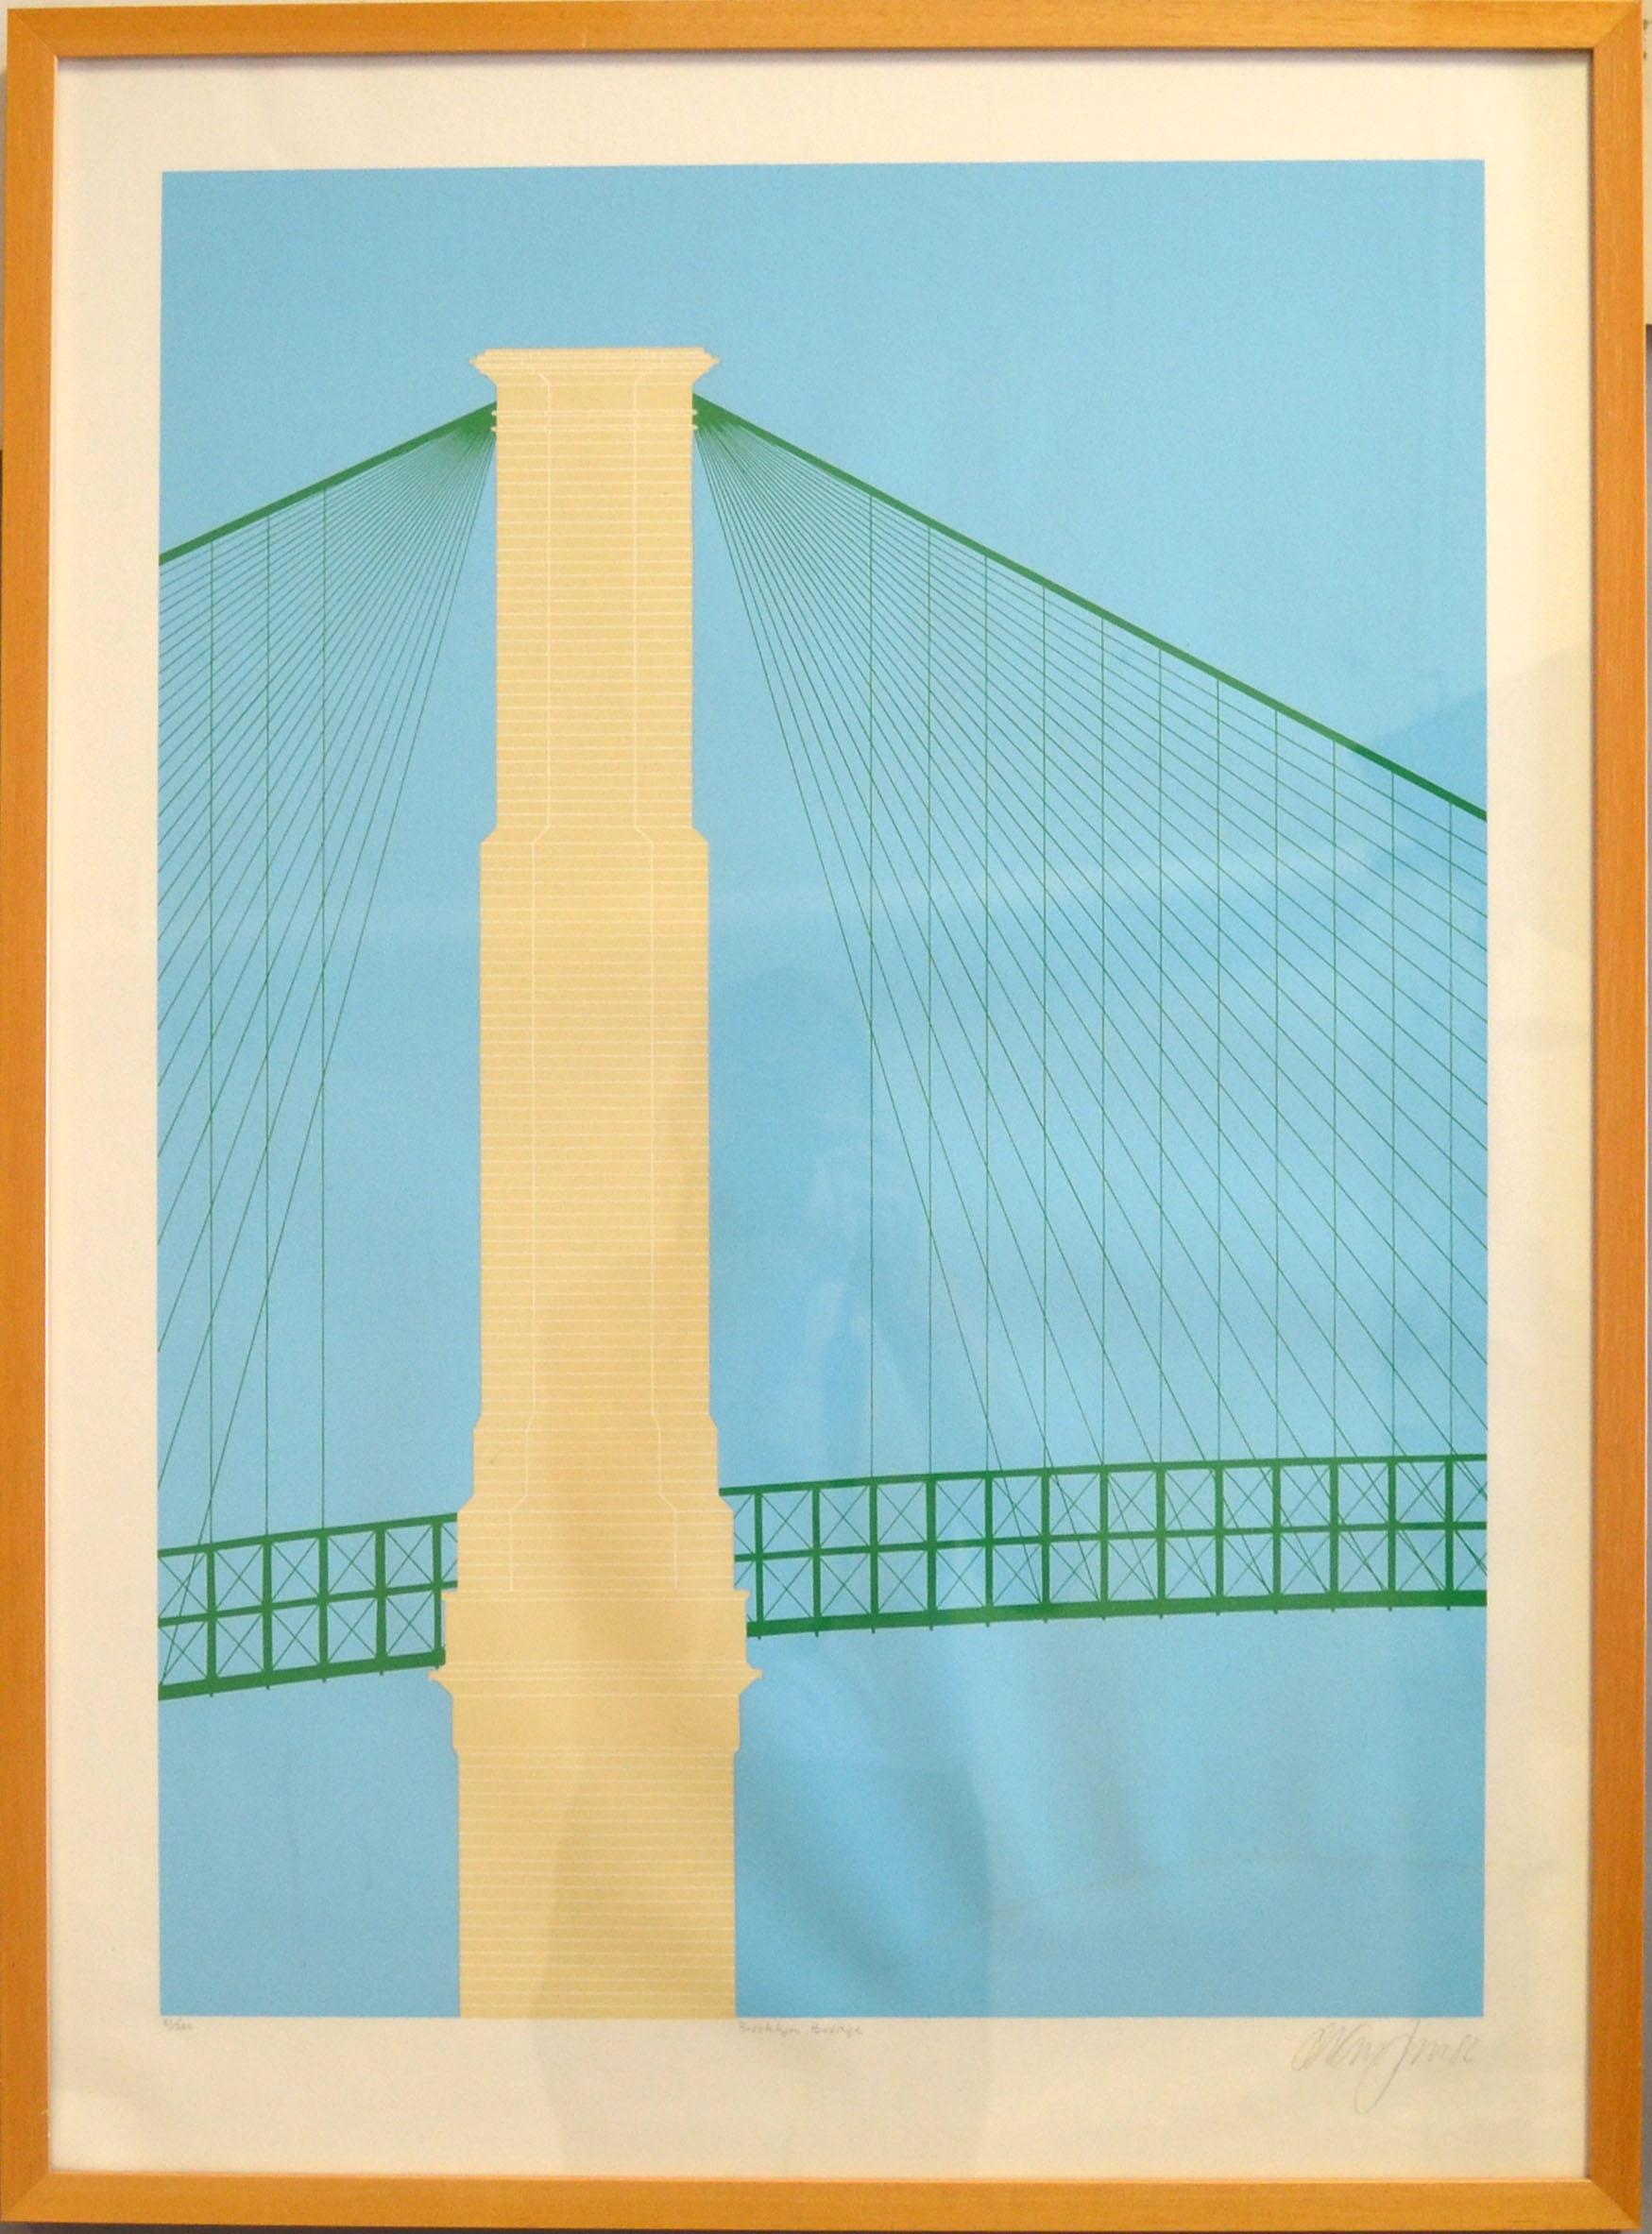 Large wood framed Brooklyn Bridge New York made in 1982 Mid-Century Modern Wall Painting, Fine Art.
Signed by Artist., Numbered 51/250.
Fine Art Size: 19.75 x 27.5 inches.
 